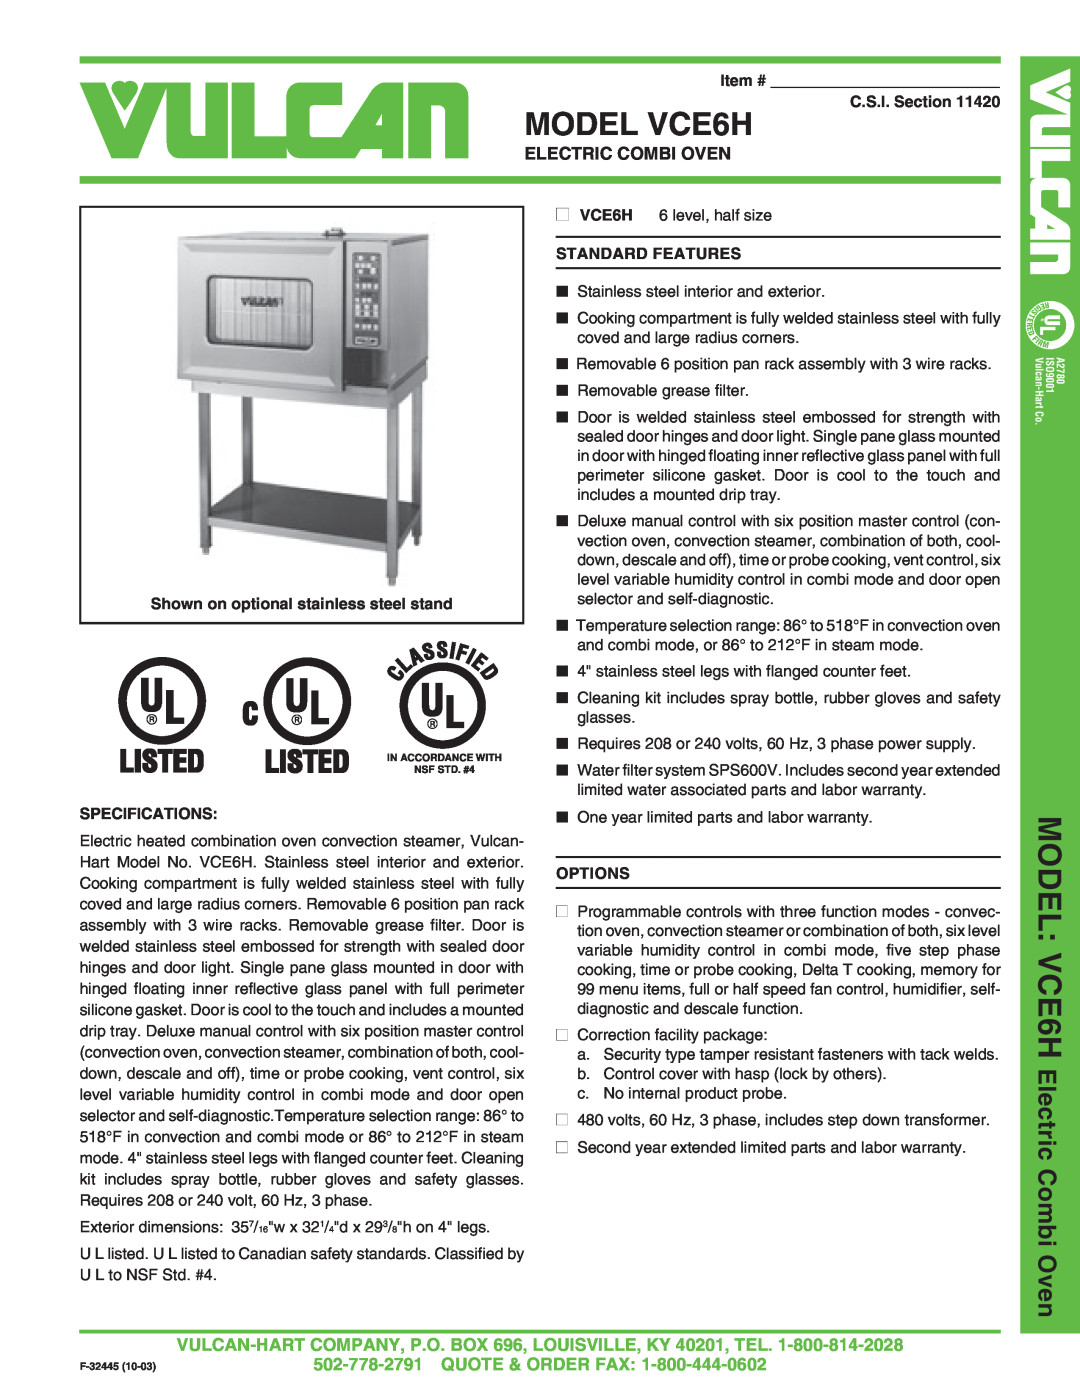 Vulcan-Hart specifications MODEL VCE6H, Electric Combi Oven, Item # C.S.I. Section, Specifications, Standard Features 